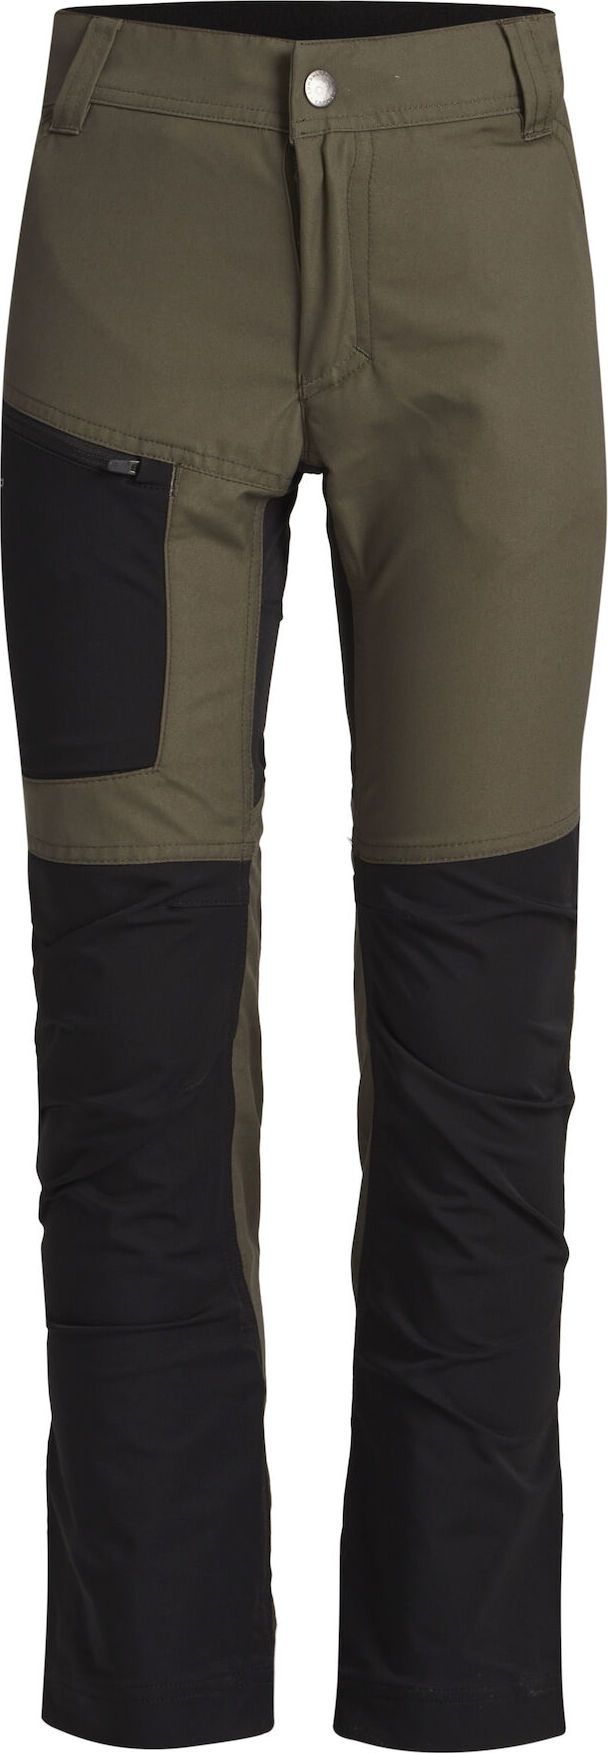 Lundhags Juniors' Fulu Stretch Hybrid Pant  Forest Green/Black Lundhags